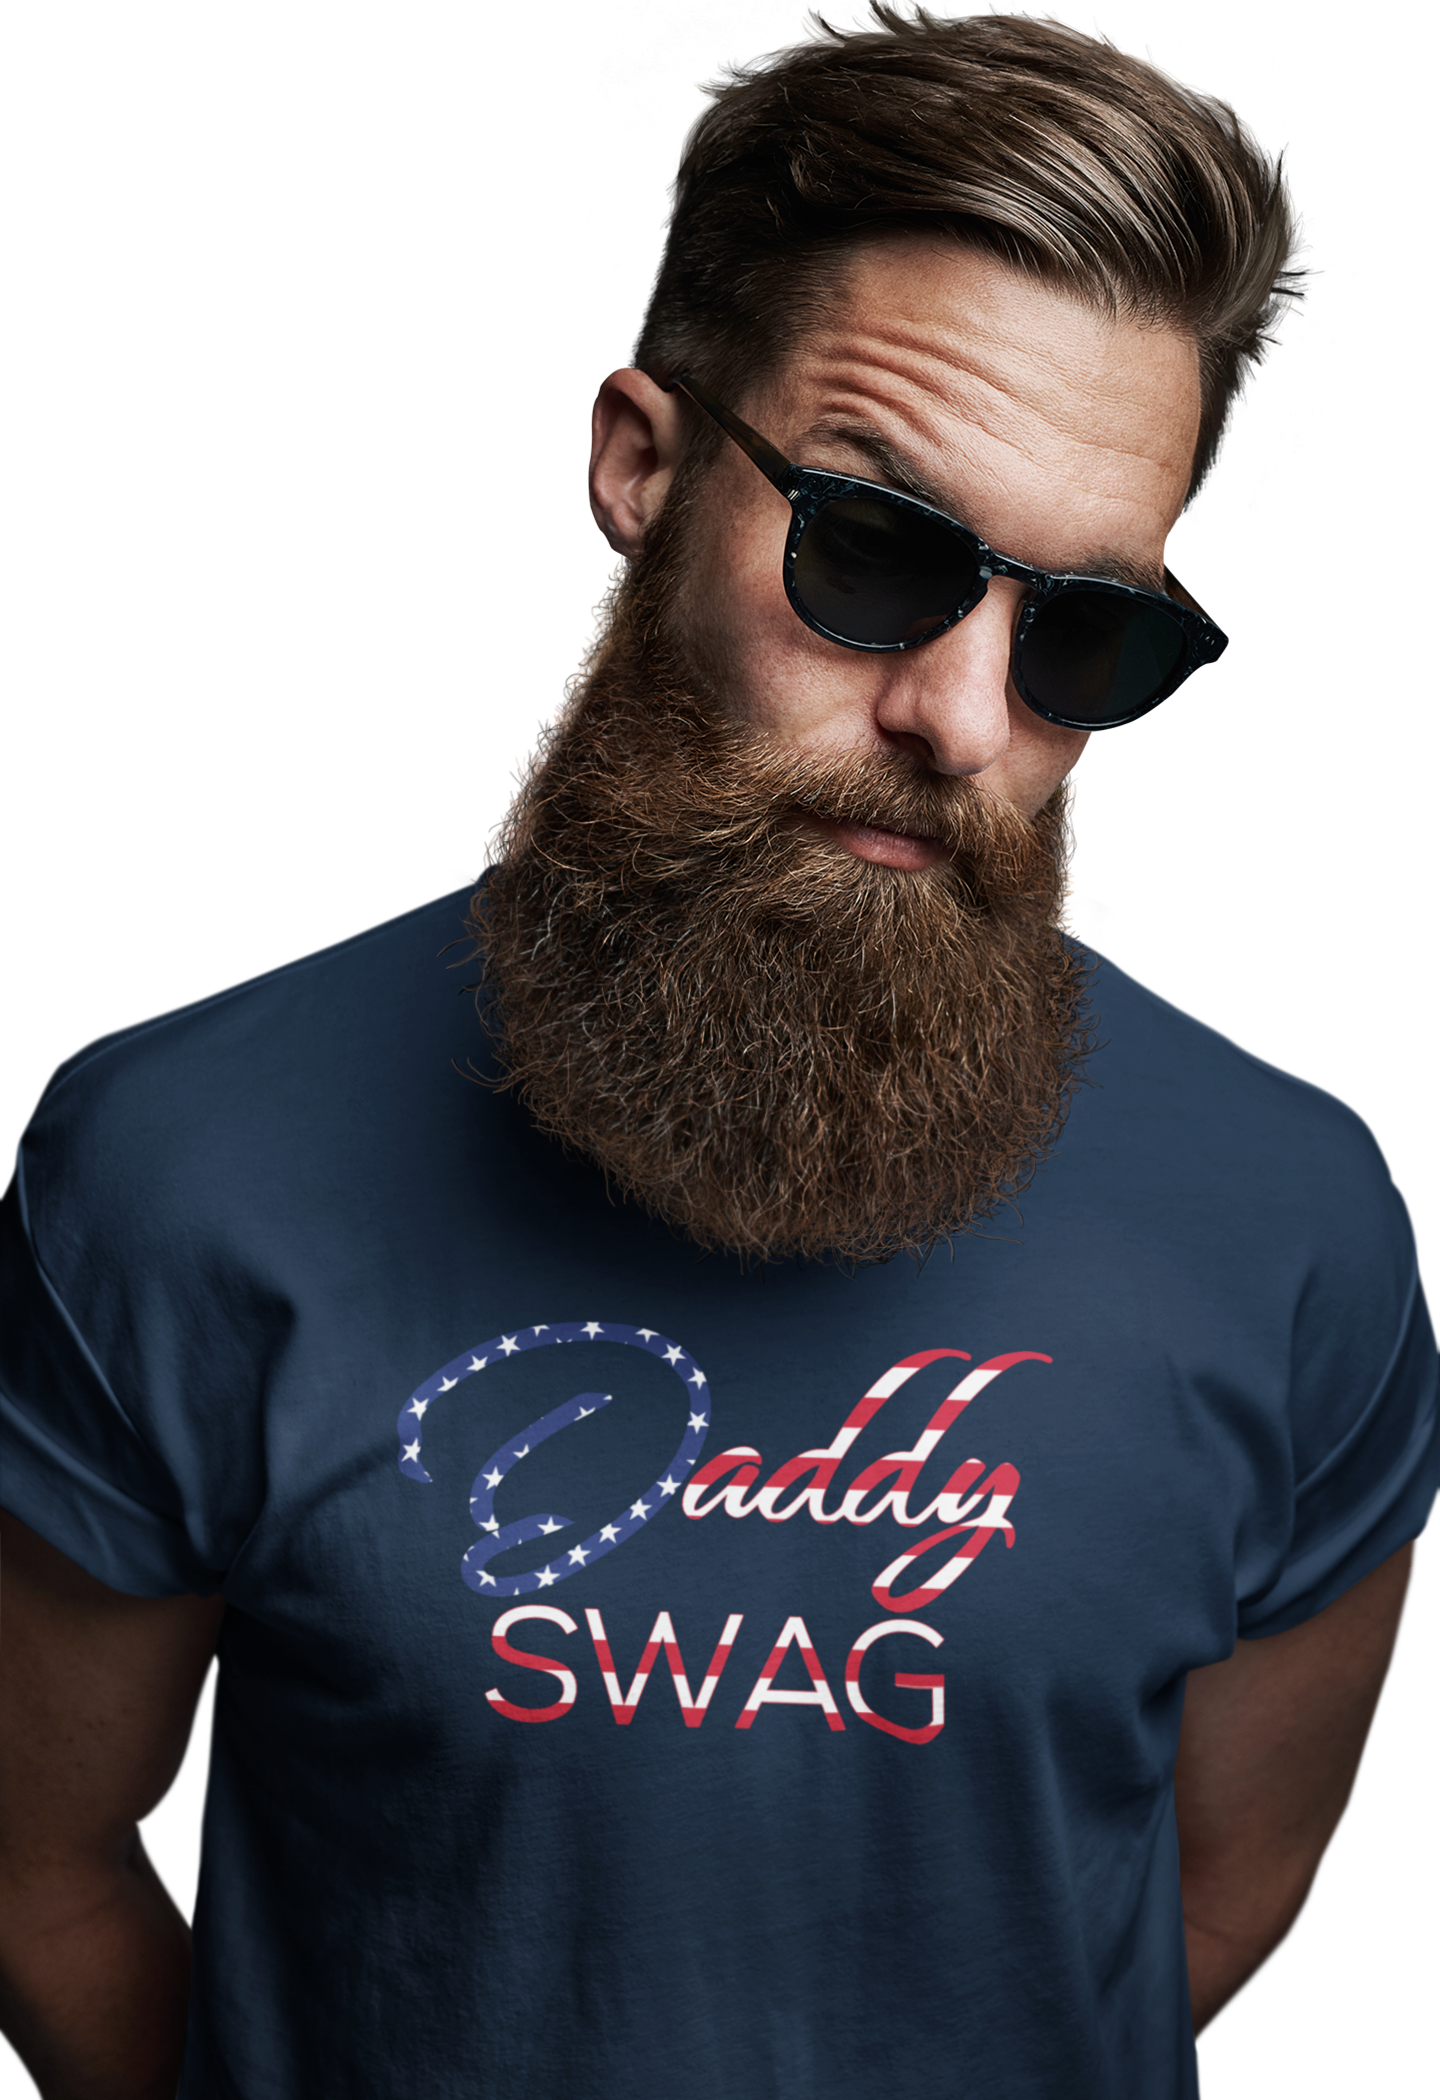 DADDY SWAG SIGNATURE COLLECTION T-SHIRT